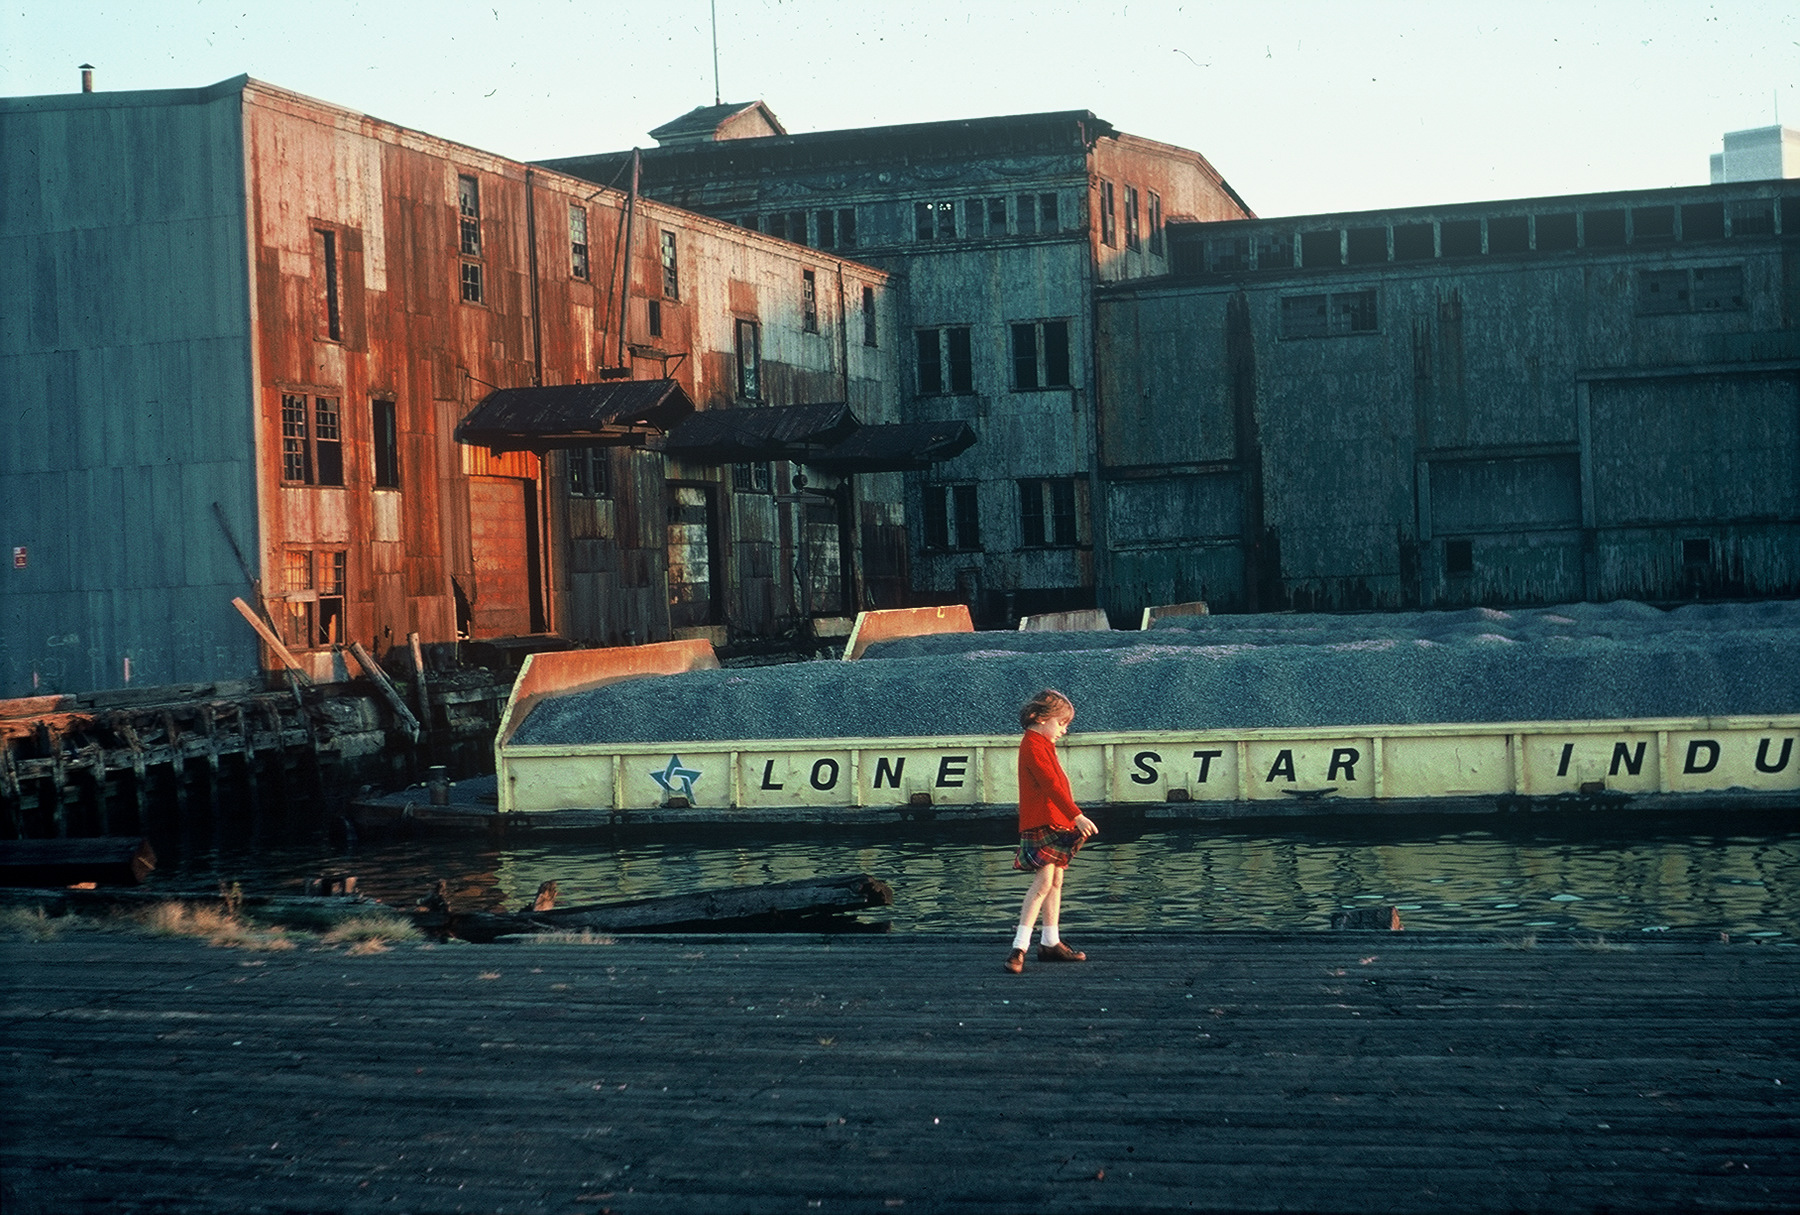 A young girl in a red jacket and plaid skirt standing on a pier with rusting industrial buildings in the background.